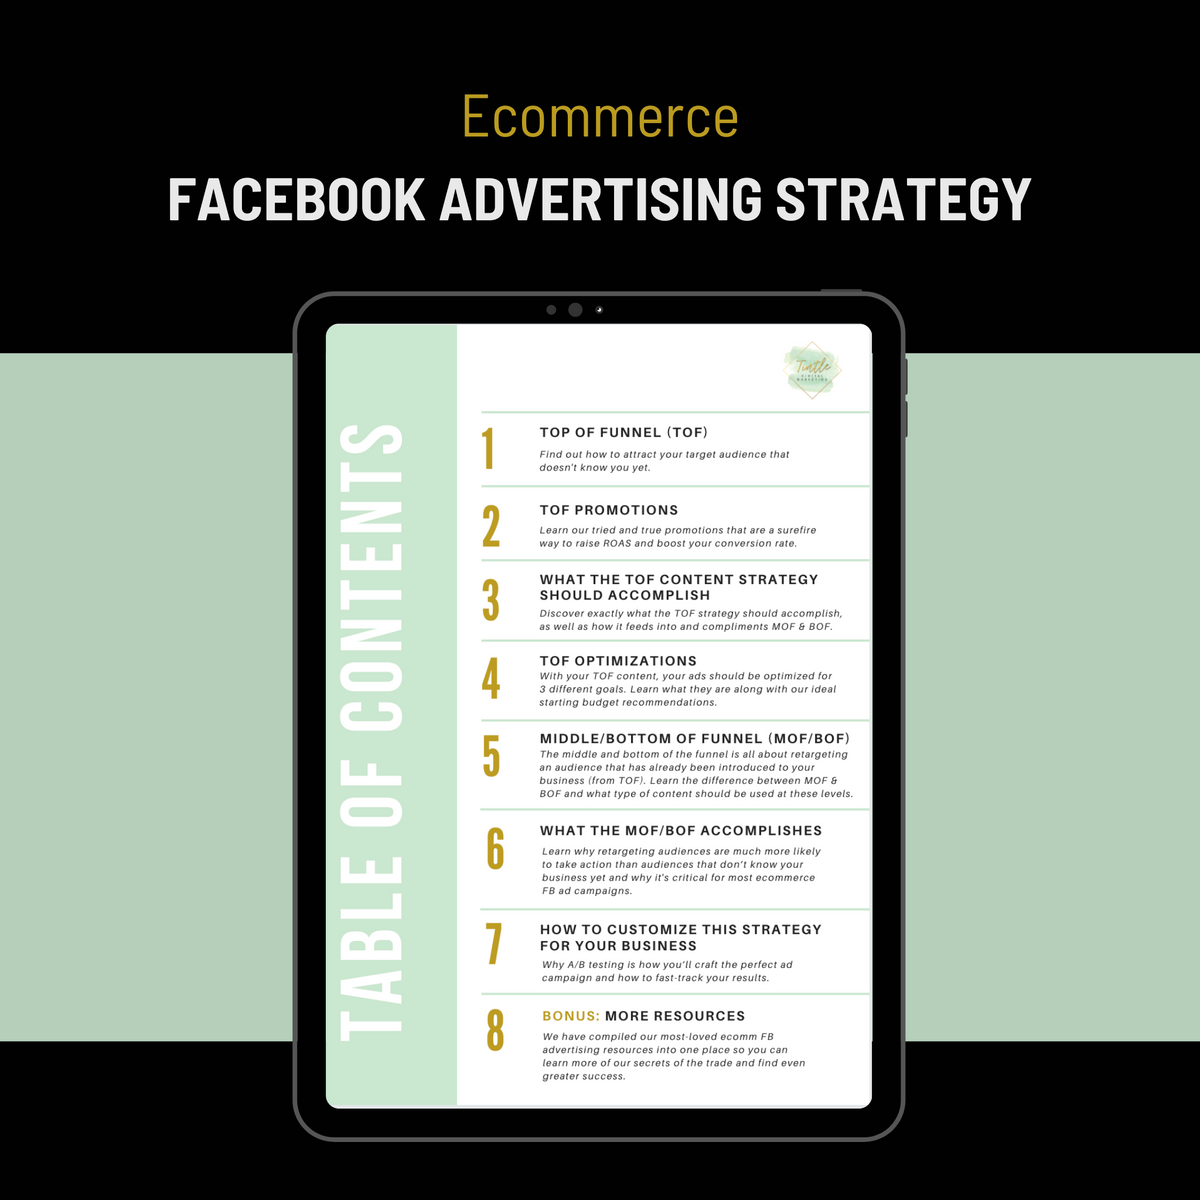 Strategy For Ecommerce Facebook Ads